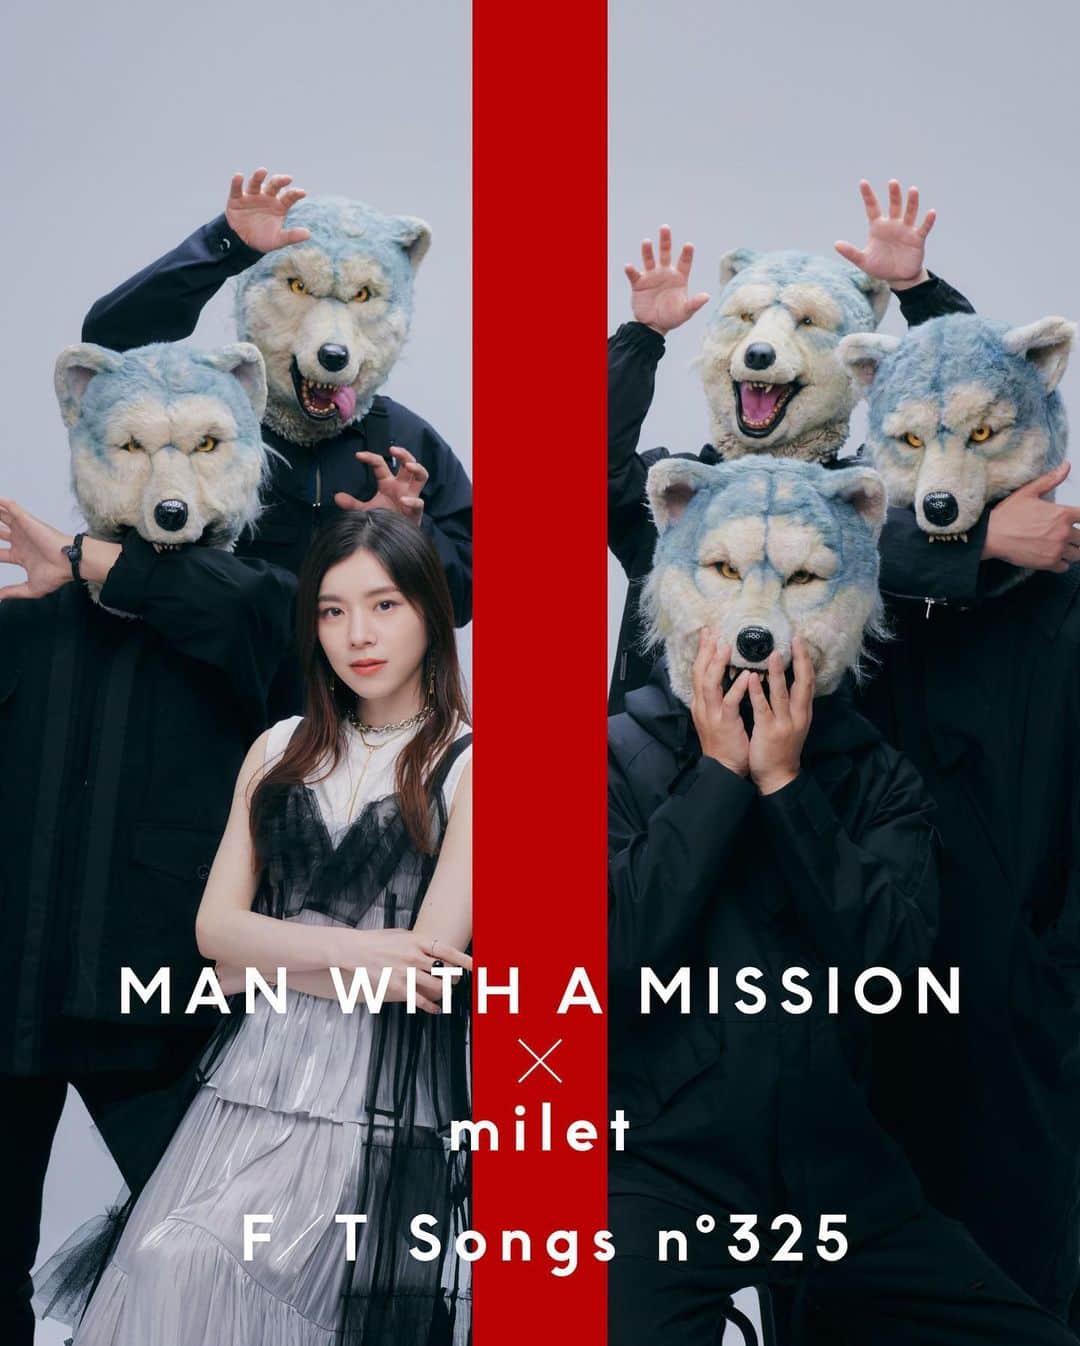 miletのインスタグラム：「THE FIRST TAKEにて、 MAN WITH A MISSION × milet 「絆ノ奇跡」 本日22:00公開！ ▶ https://www.youtube.com/watch?v=wFj7d_fnYTU  #THEFIRSTTAKE #マンウィズミレイday #鬼滅の刃 #刀鍛冶の里編 #MWAM #milet #MWAM_milet」